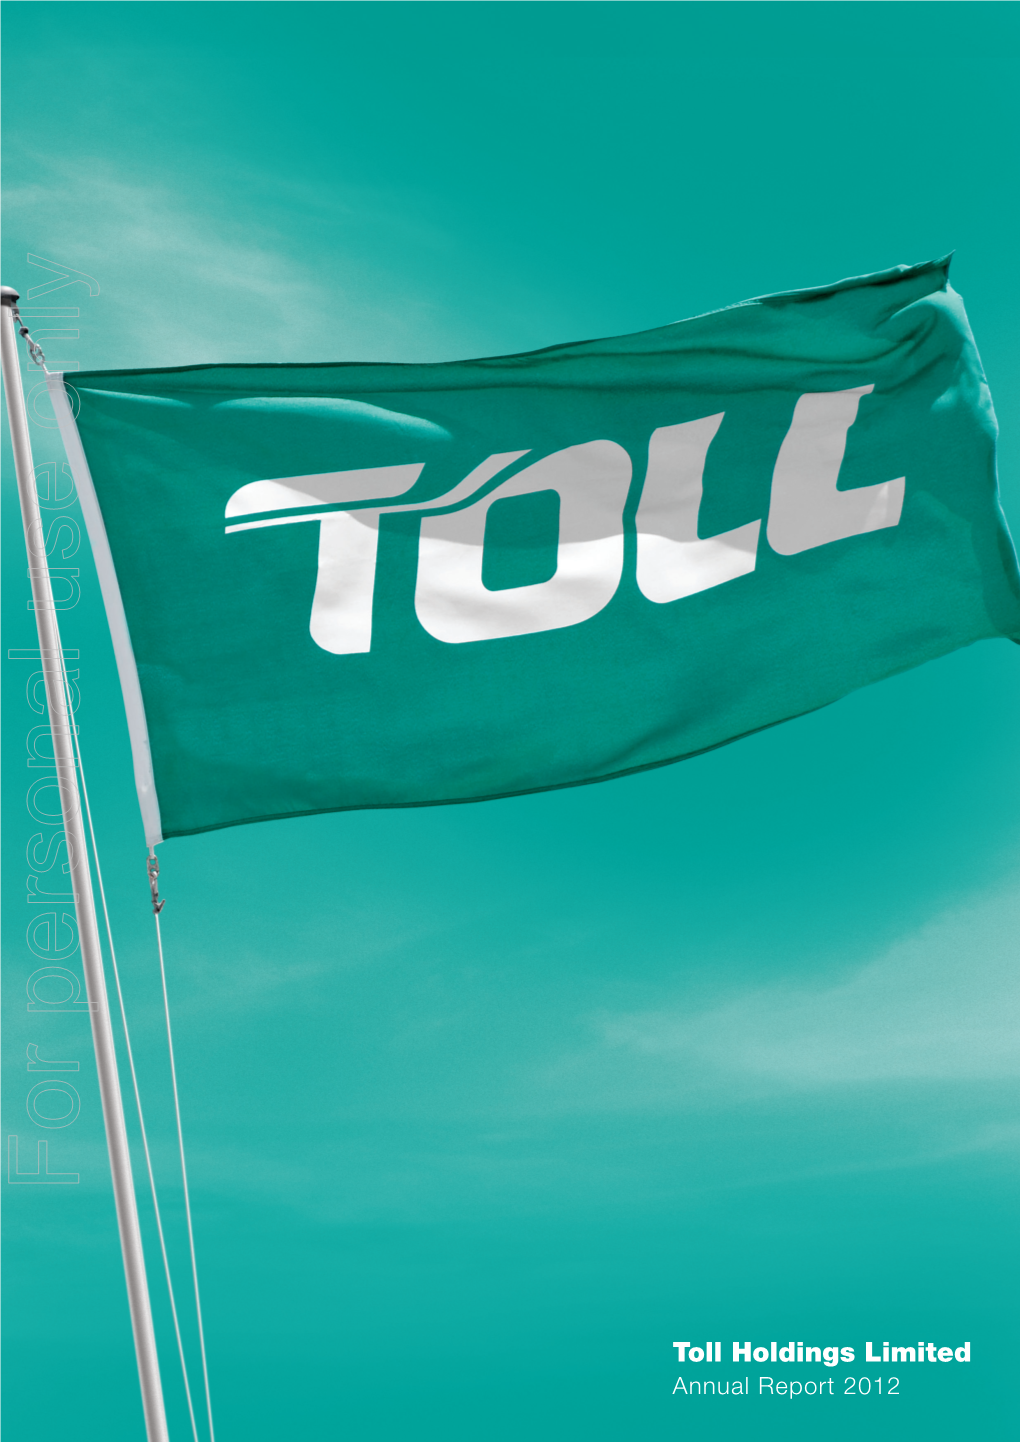 Toll Holdings Limited Annual Report 2012 Toll Group Is the Asian Region’S Leading Provider of Integrated Logistics